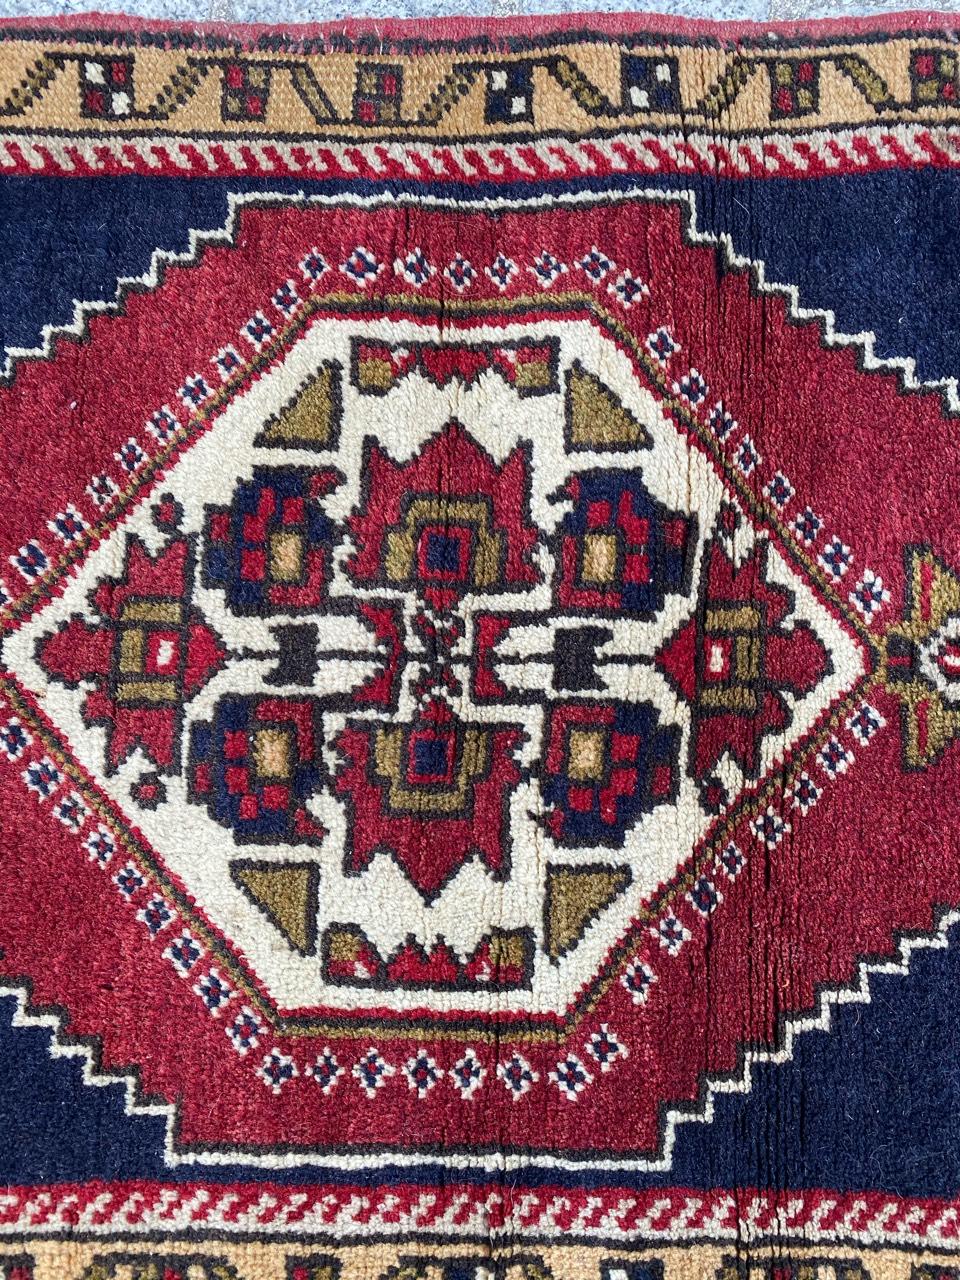 Beautiful Turkish rug with a geometrical design and nice colors with red, blue, yellow and green, entirely hand knotted with wool velvet on wool foundation.